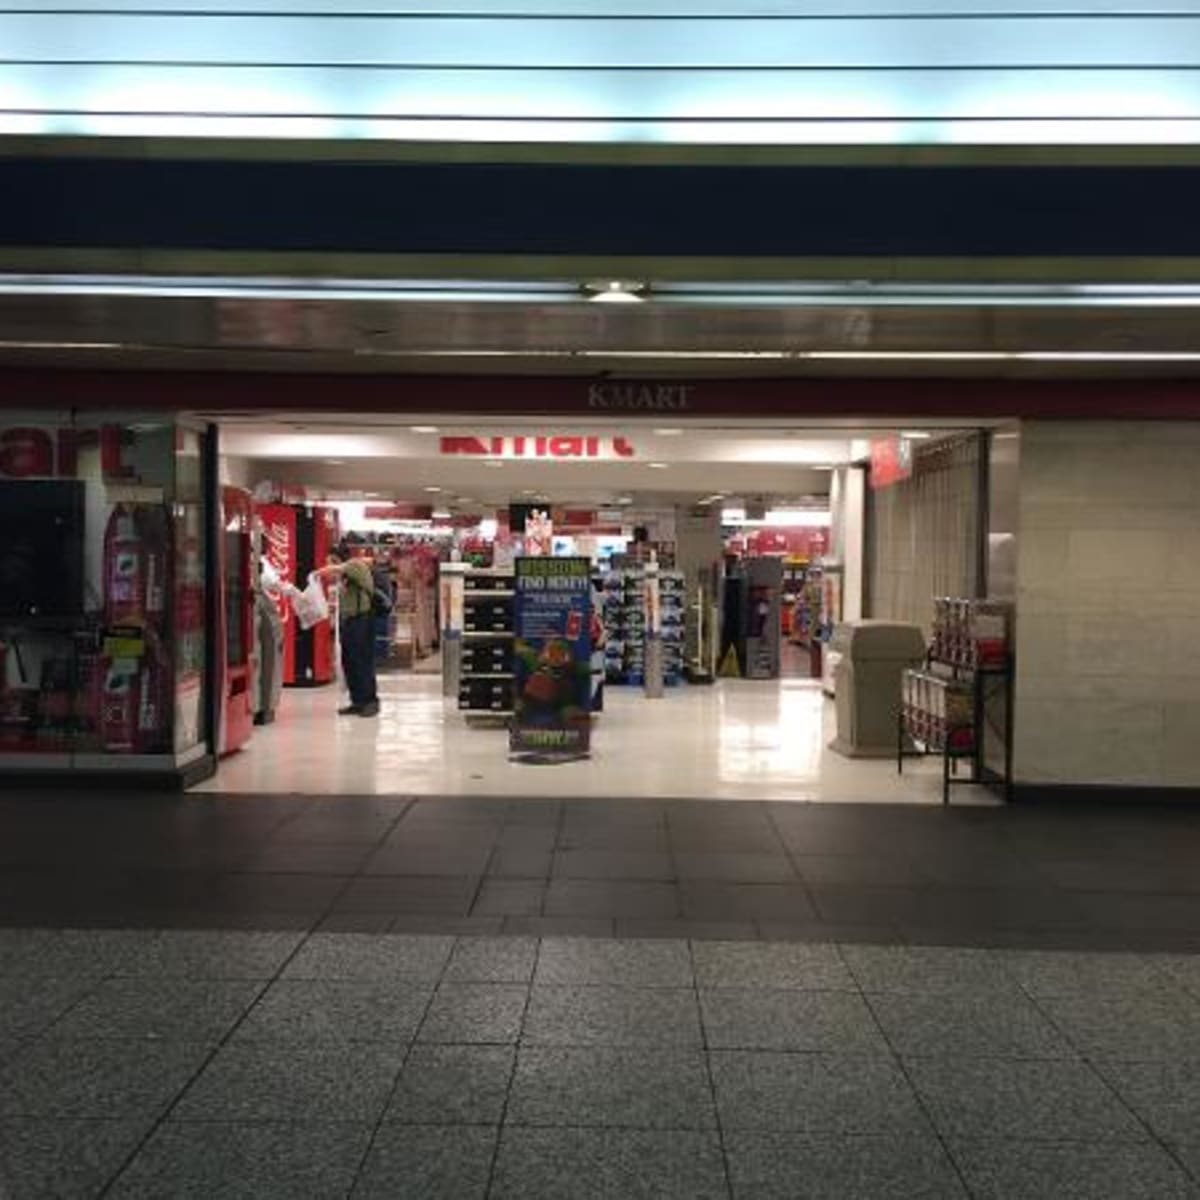 Lampert Says Kmart Is Fun to Shop, but at Penn Station, We Found